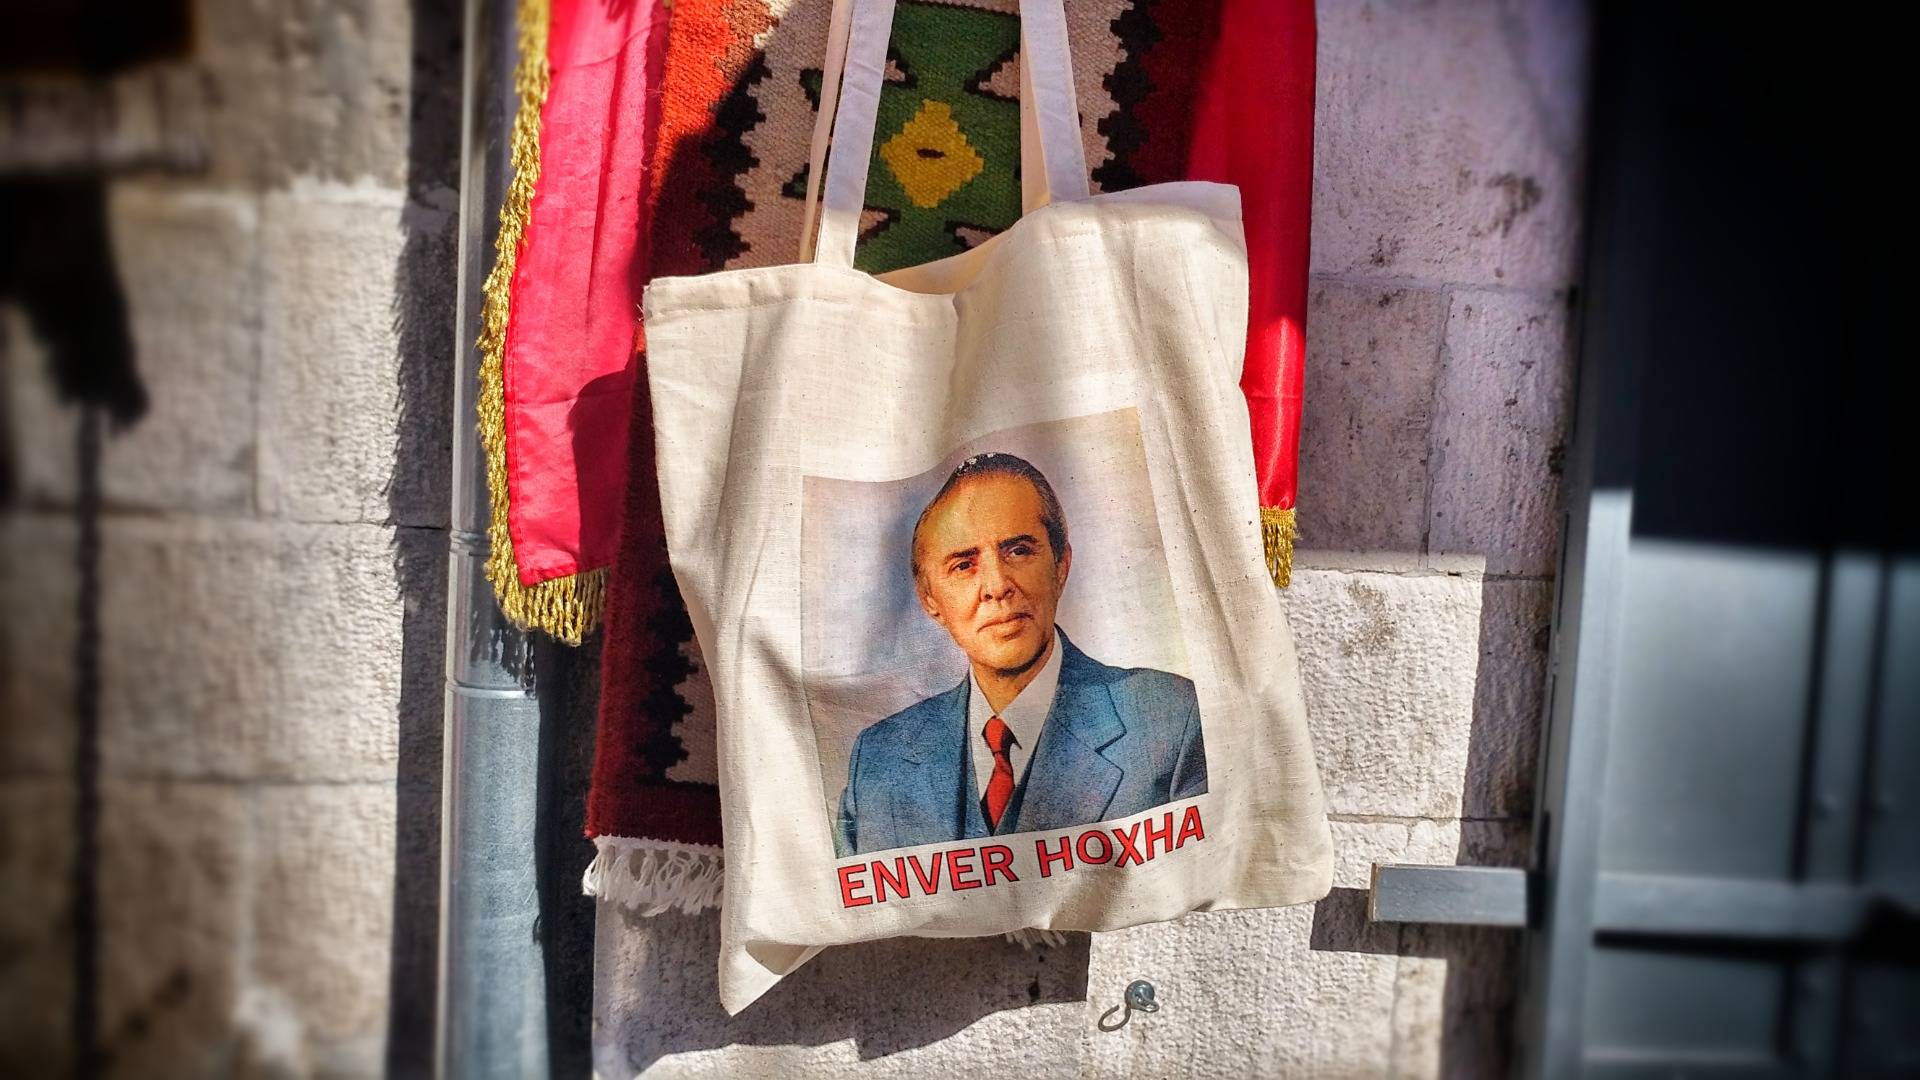 Enver Hoxha was the dictator of the country for years and years. Now he is a hero for some people